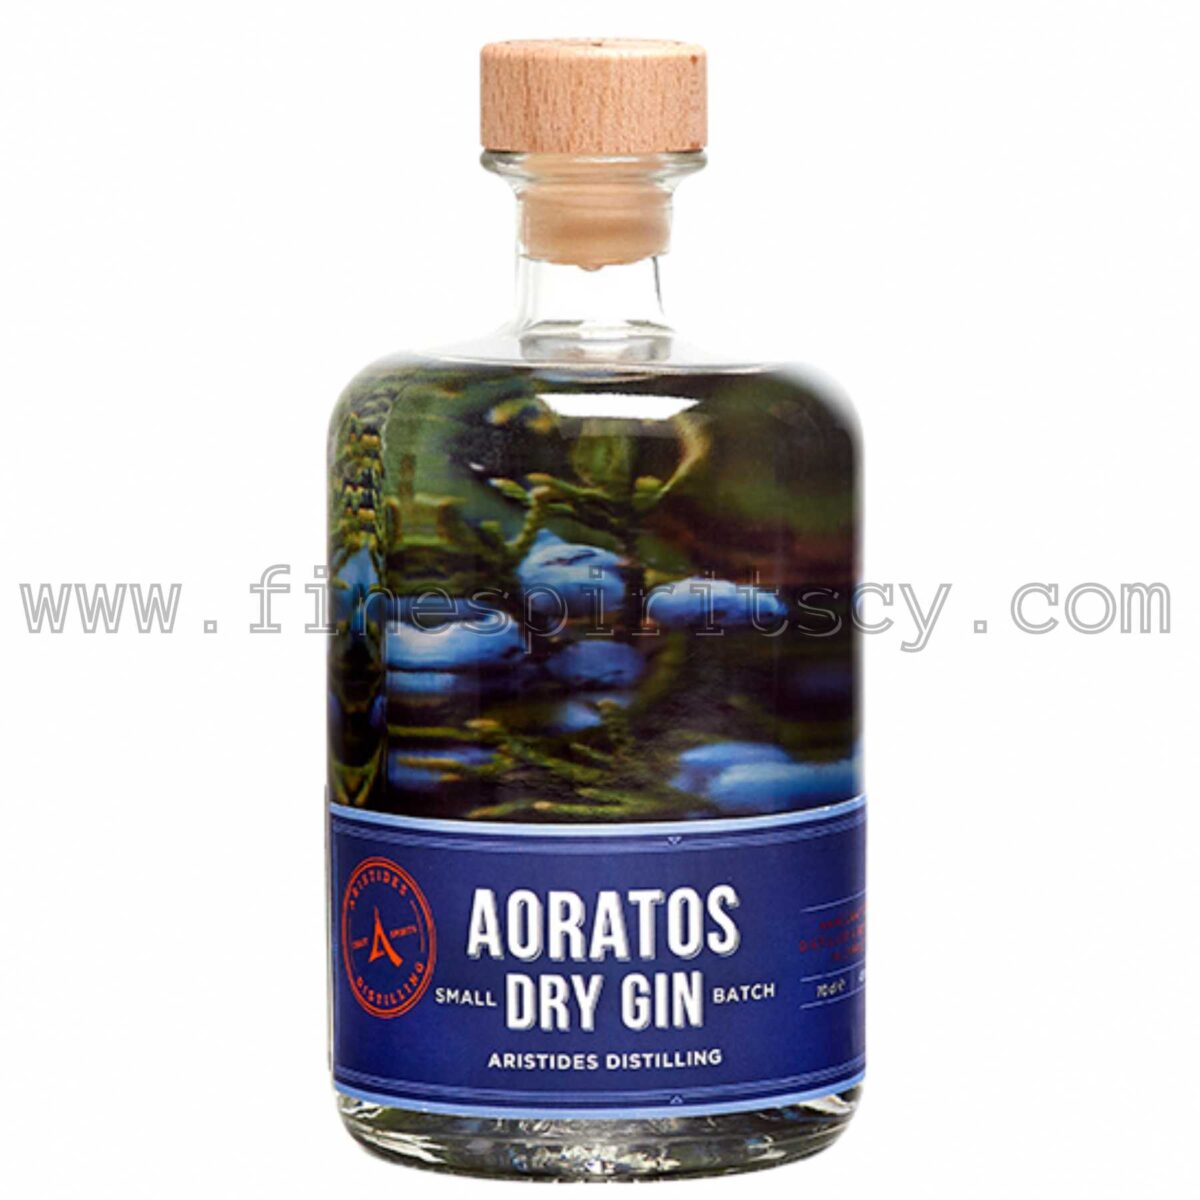 Aoratos Cypriot Dry Gin 700ml 70cl 0.7L Price Cyprus Fine Spirits CY